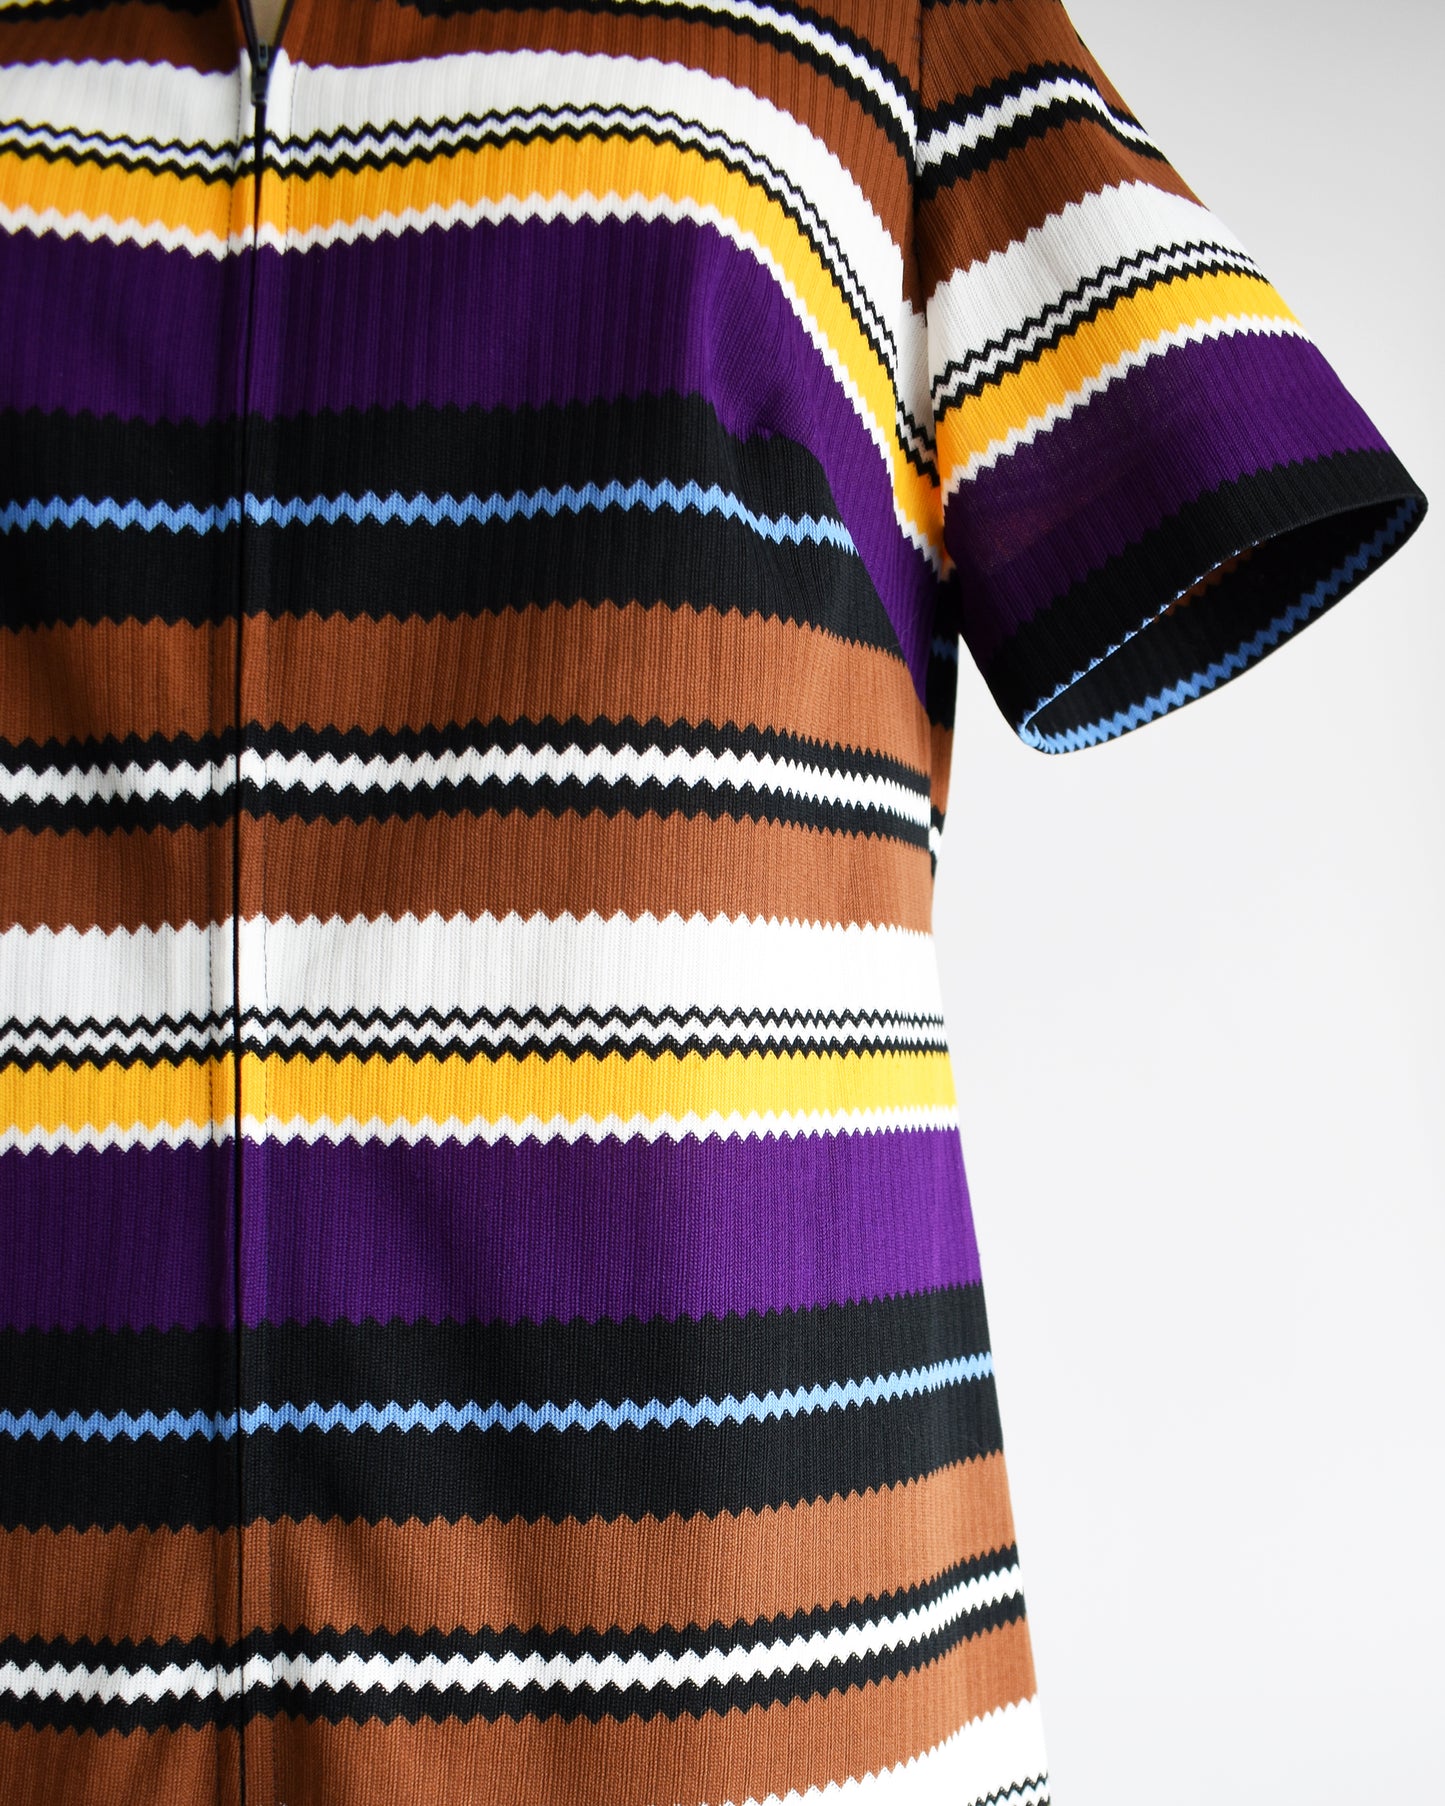 Close up of the a vintage 1970s striped mod dress that has black, brown, white, blue, yellow, and purple horizontal stripes with zigzag edges. The dress features a zipper down the front which is unzipped a little bit in this photo.